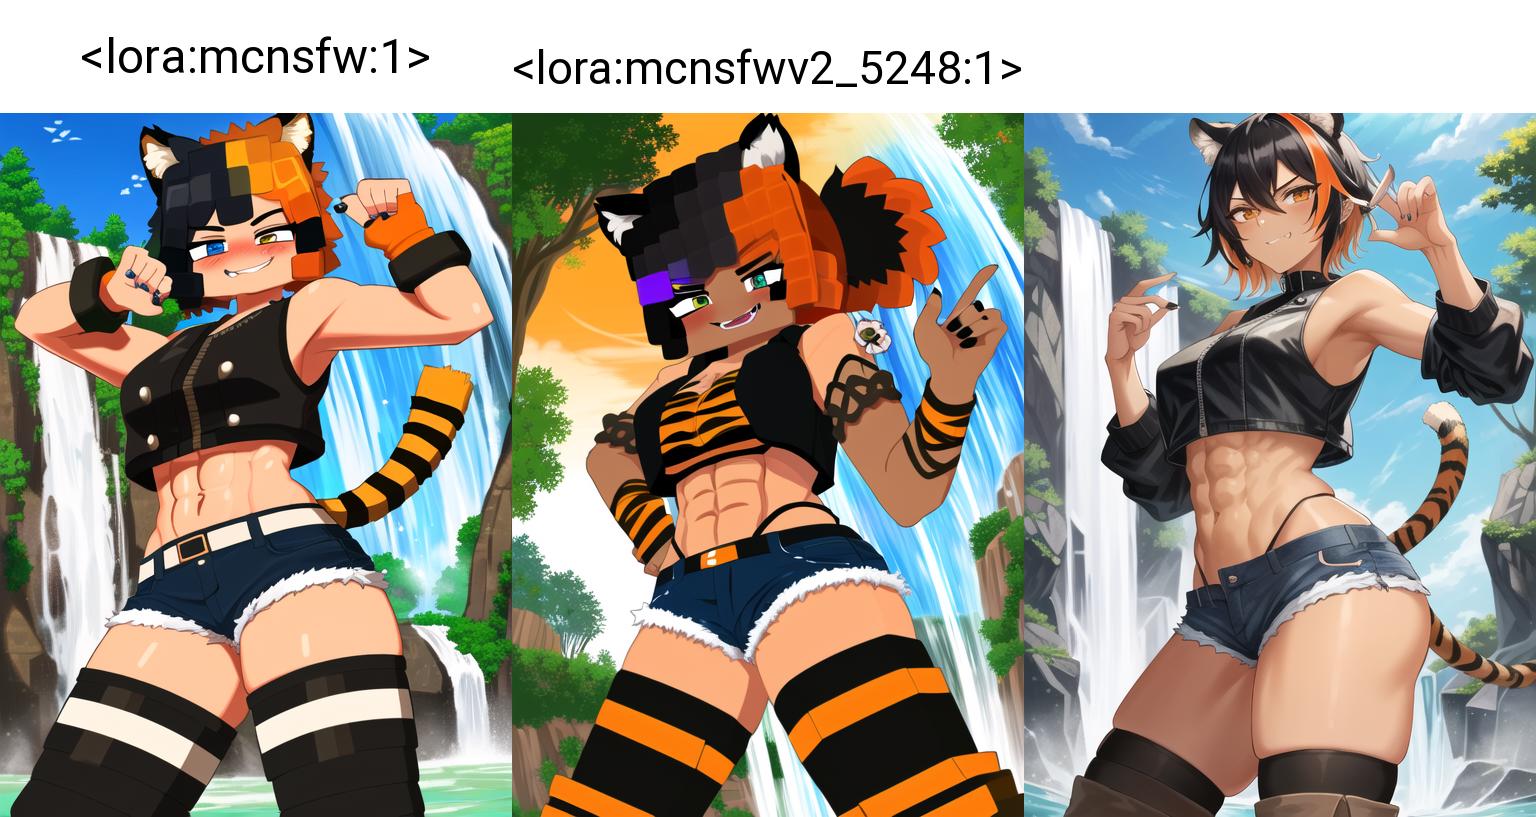 Minecraft NSFW Style image by worgensnack